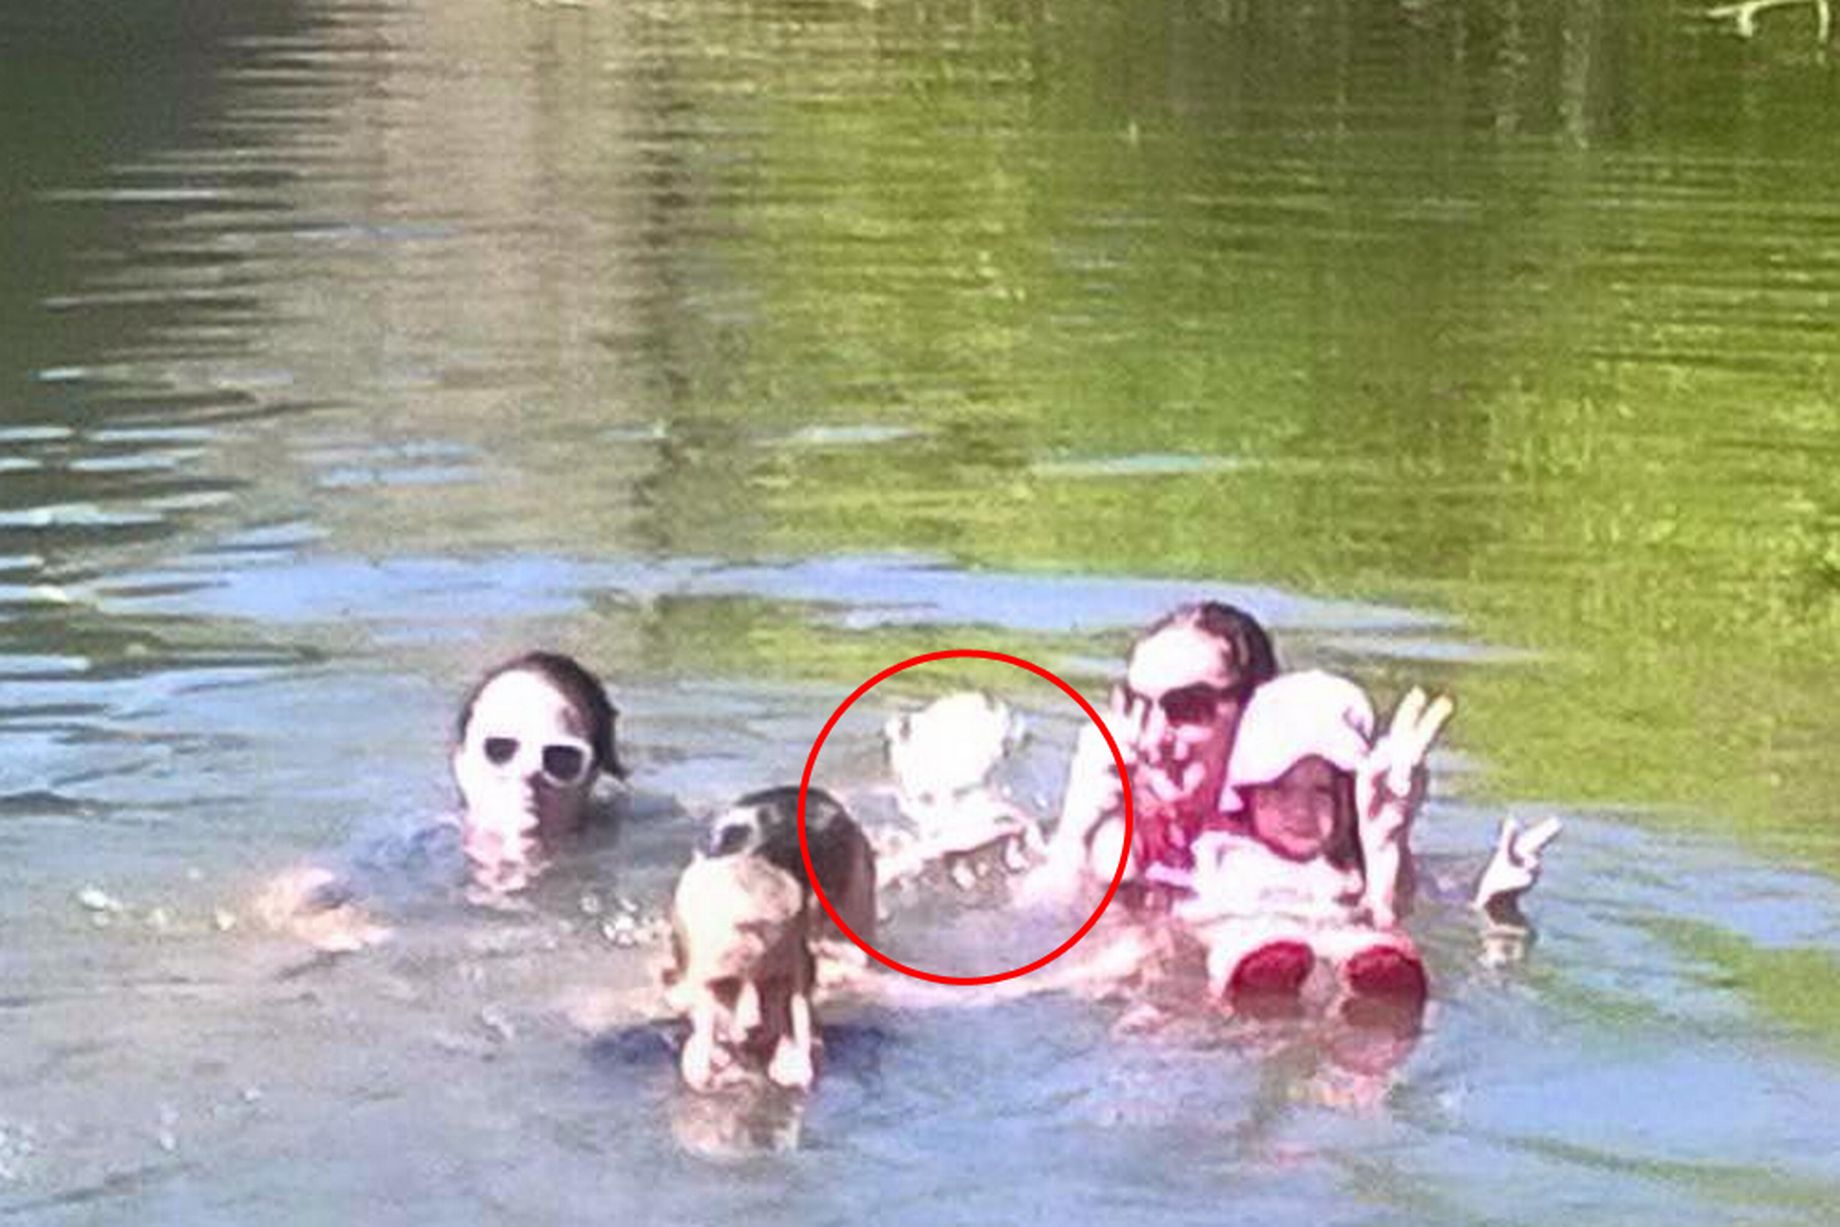 The girl in the center is not part of this family, nor was anyone else swimming with them when this photo was taken.